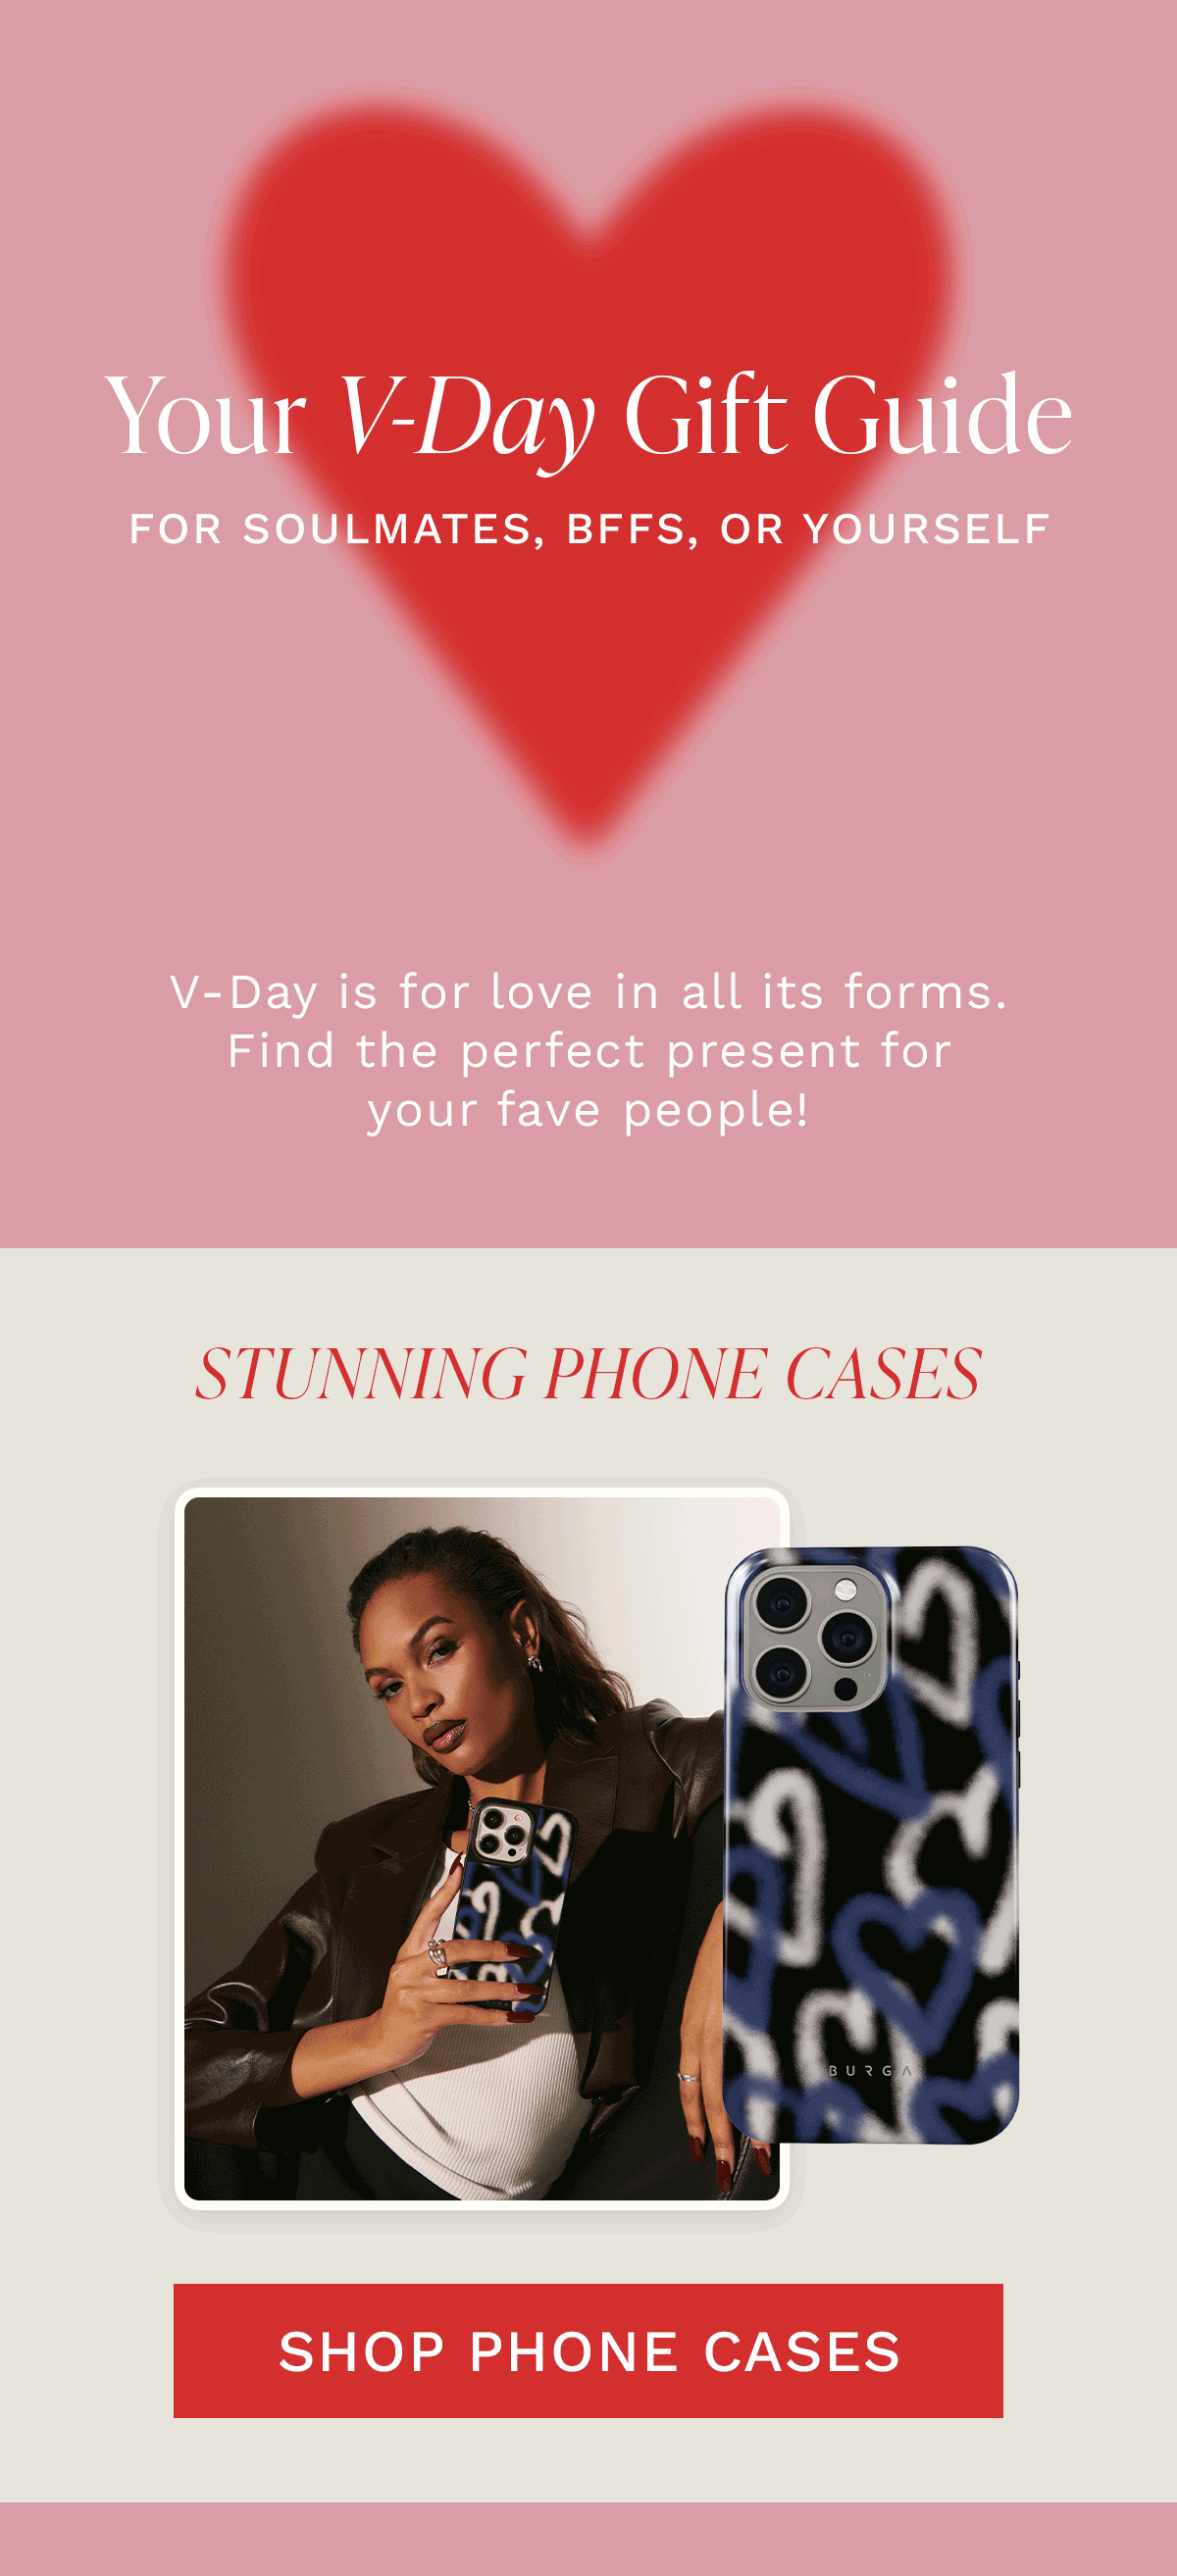 Your V-Day Gift Guide For Soulmates, BFFs, or Yourself V-Day is for love in all its forms. Find the perfect present for your fave people!